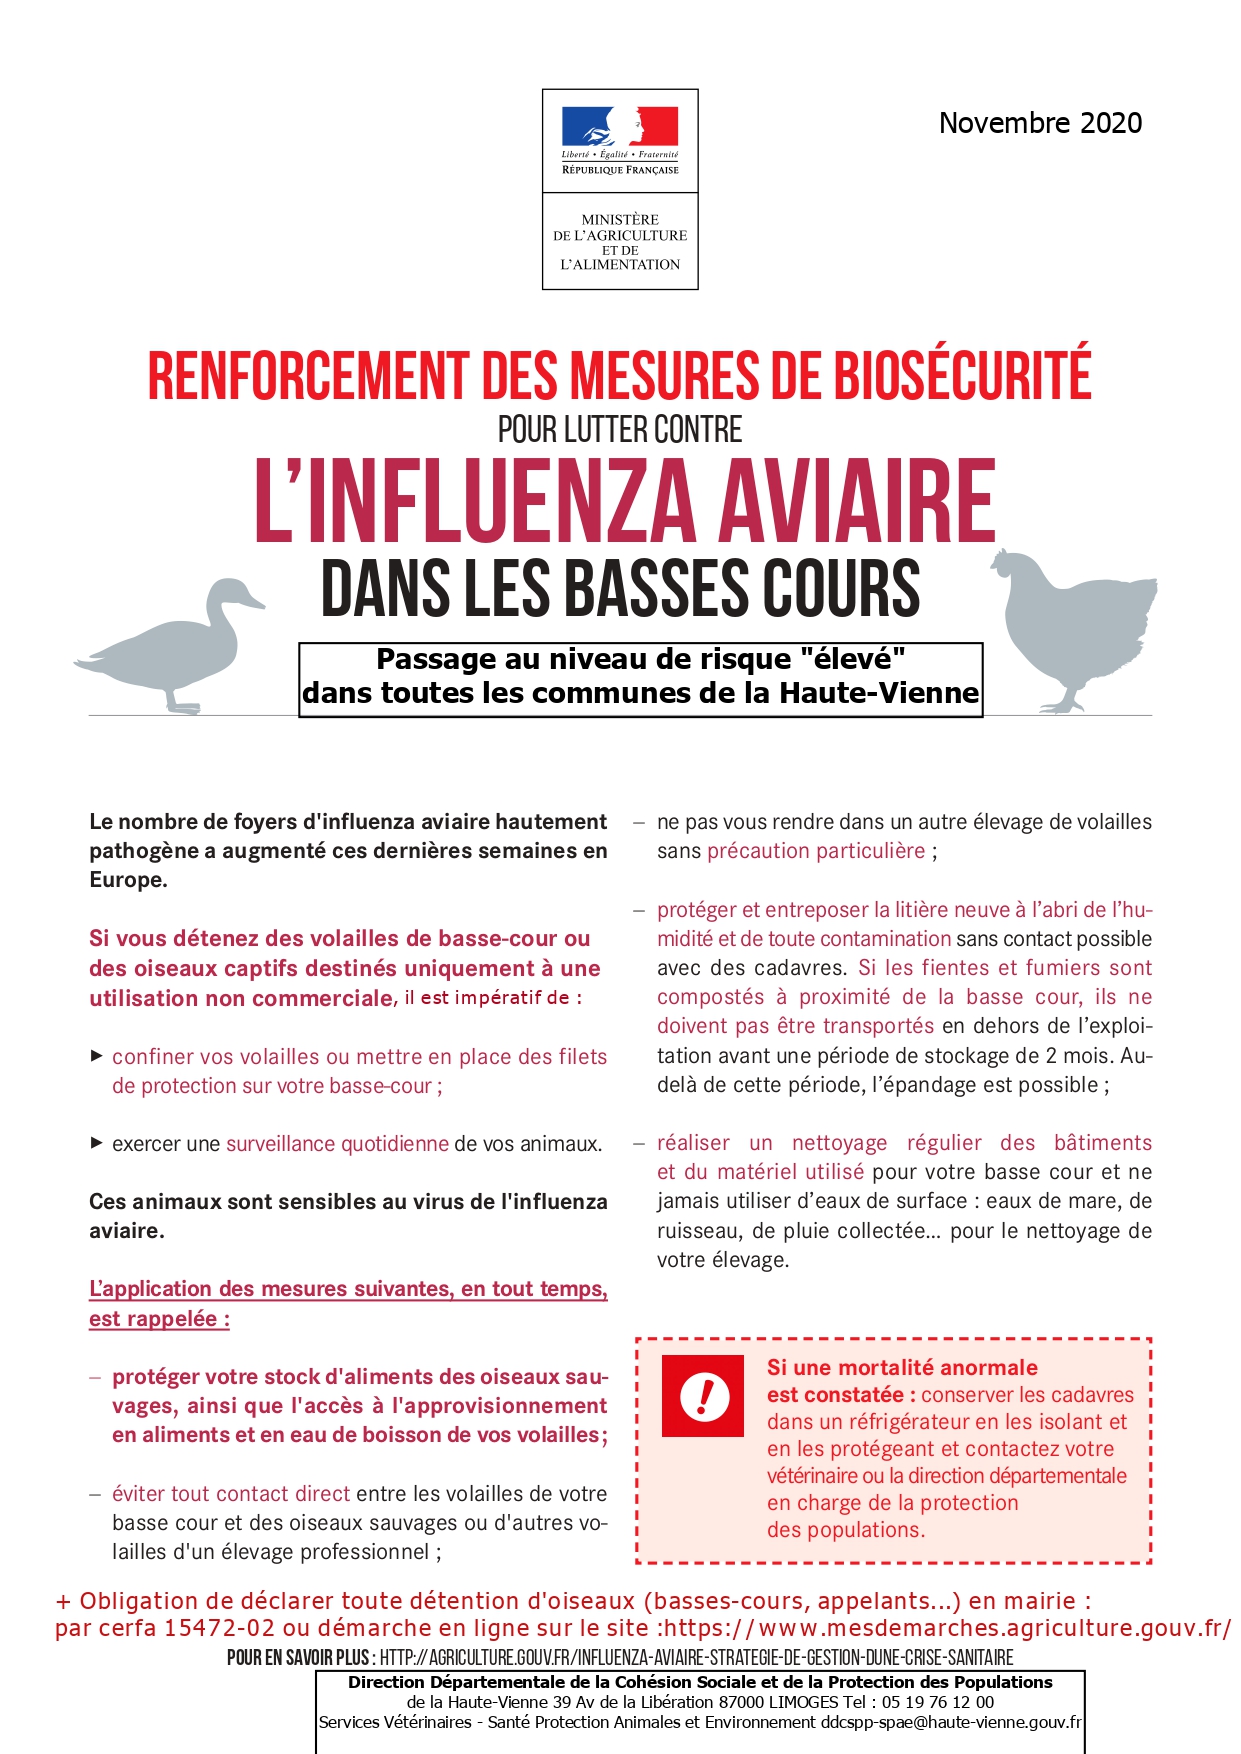 Fiche biosecurite_IA_Basses cours_page-0001.jpg